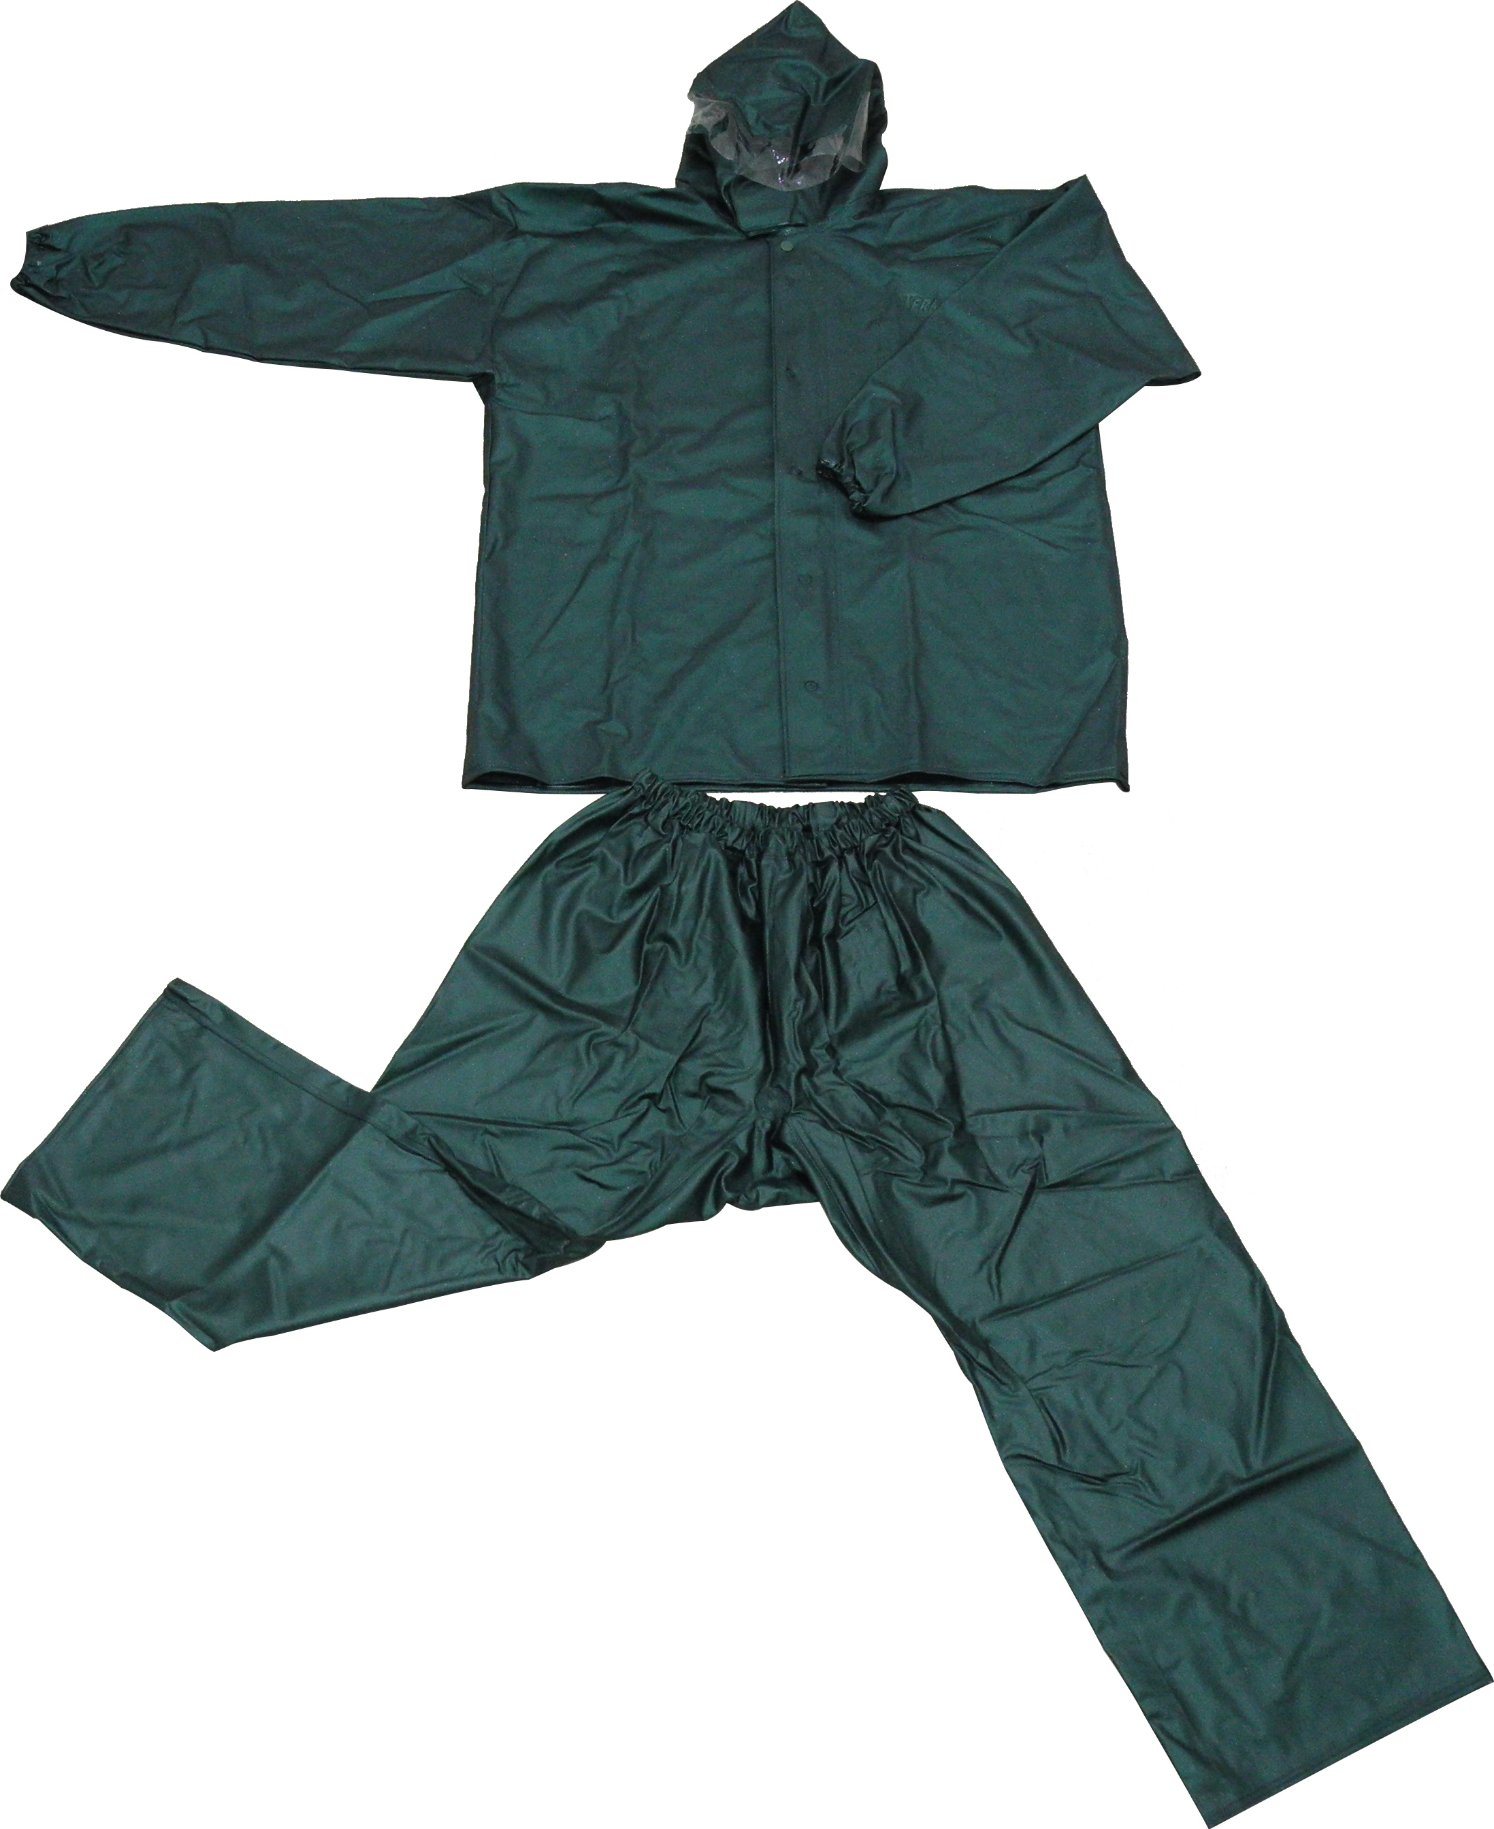 Rainsuit with Hoods, Pearlescent PVC